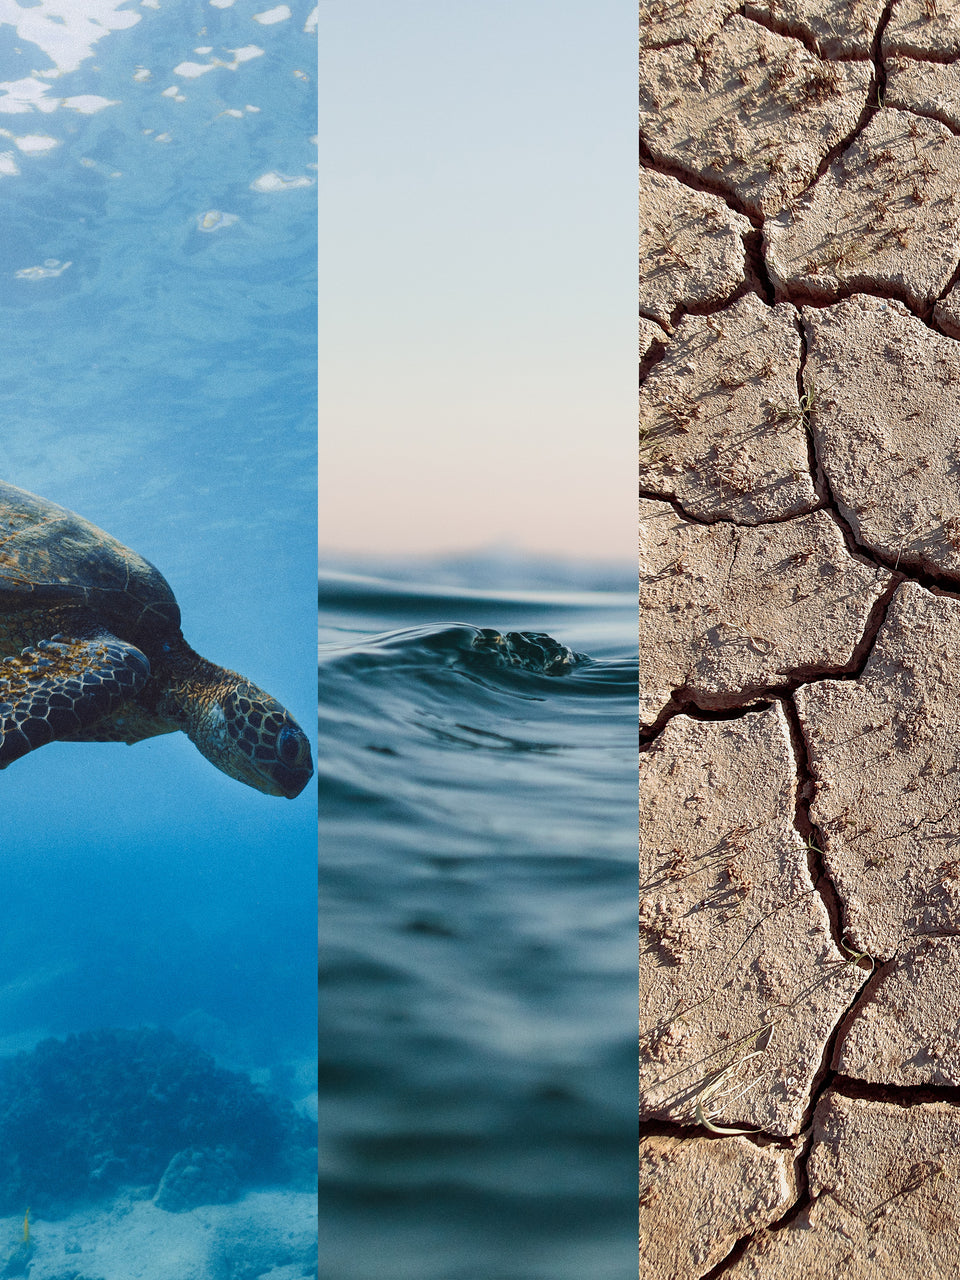 Sea turtle on the left with ocean waves in the middle and a dried out desert background on the right.